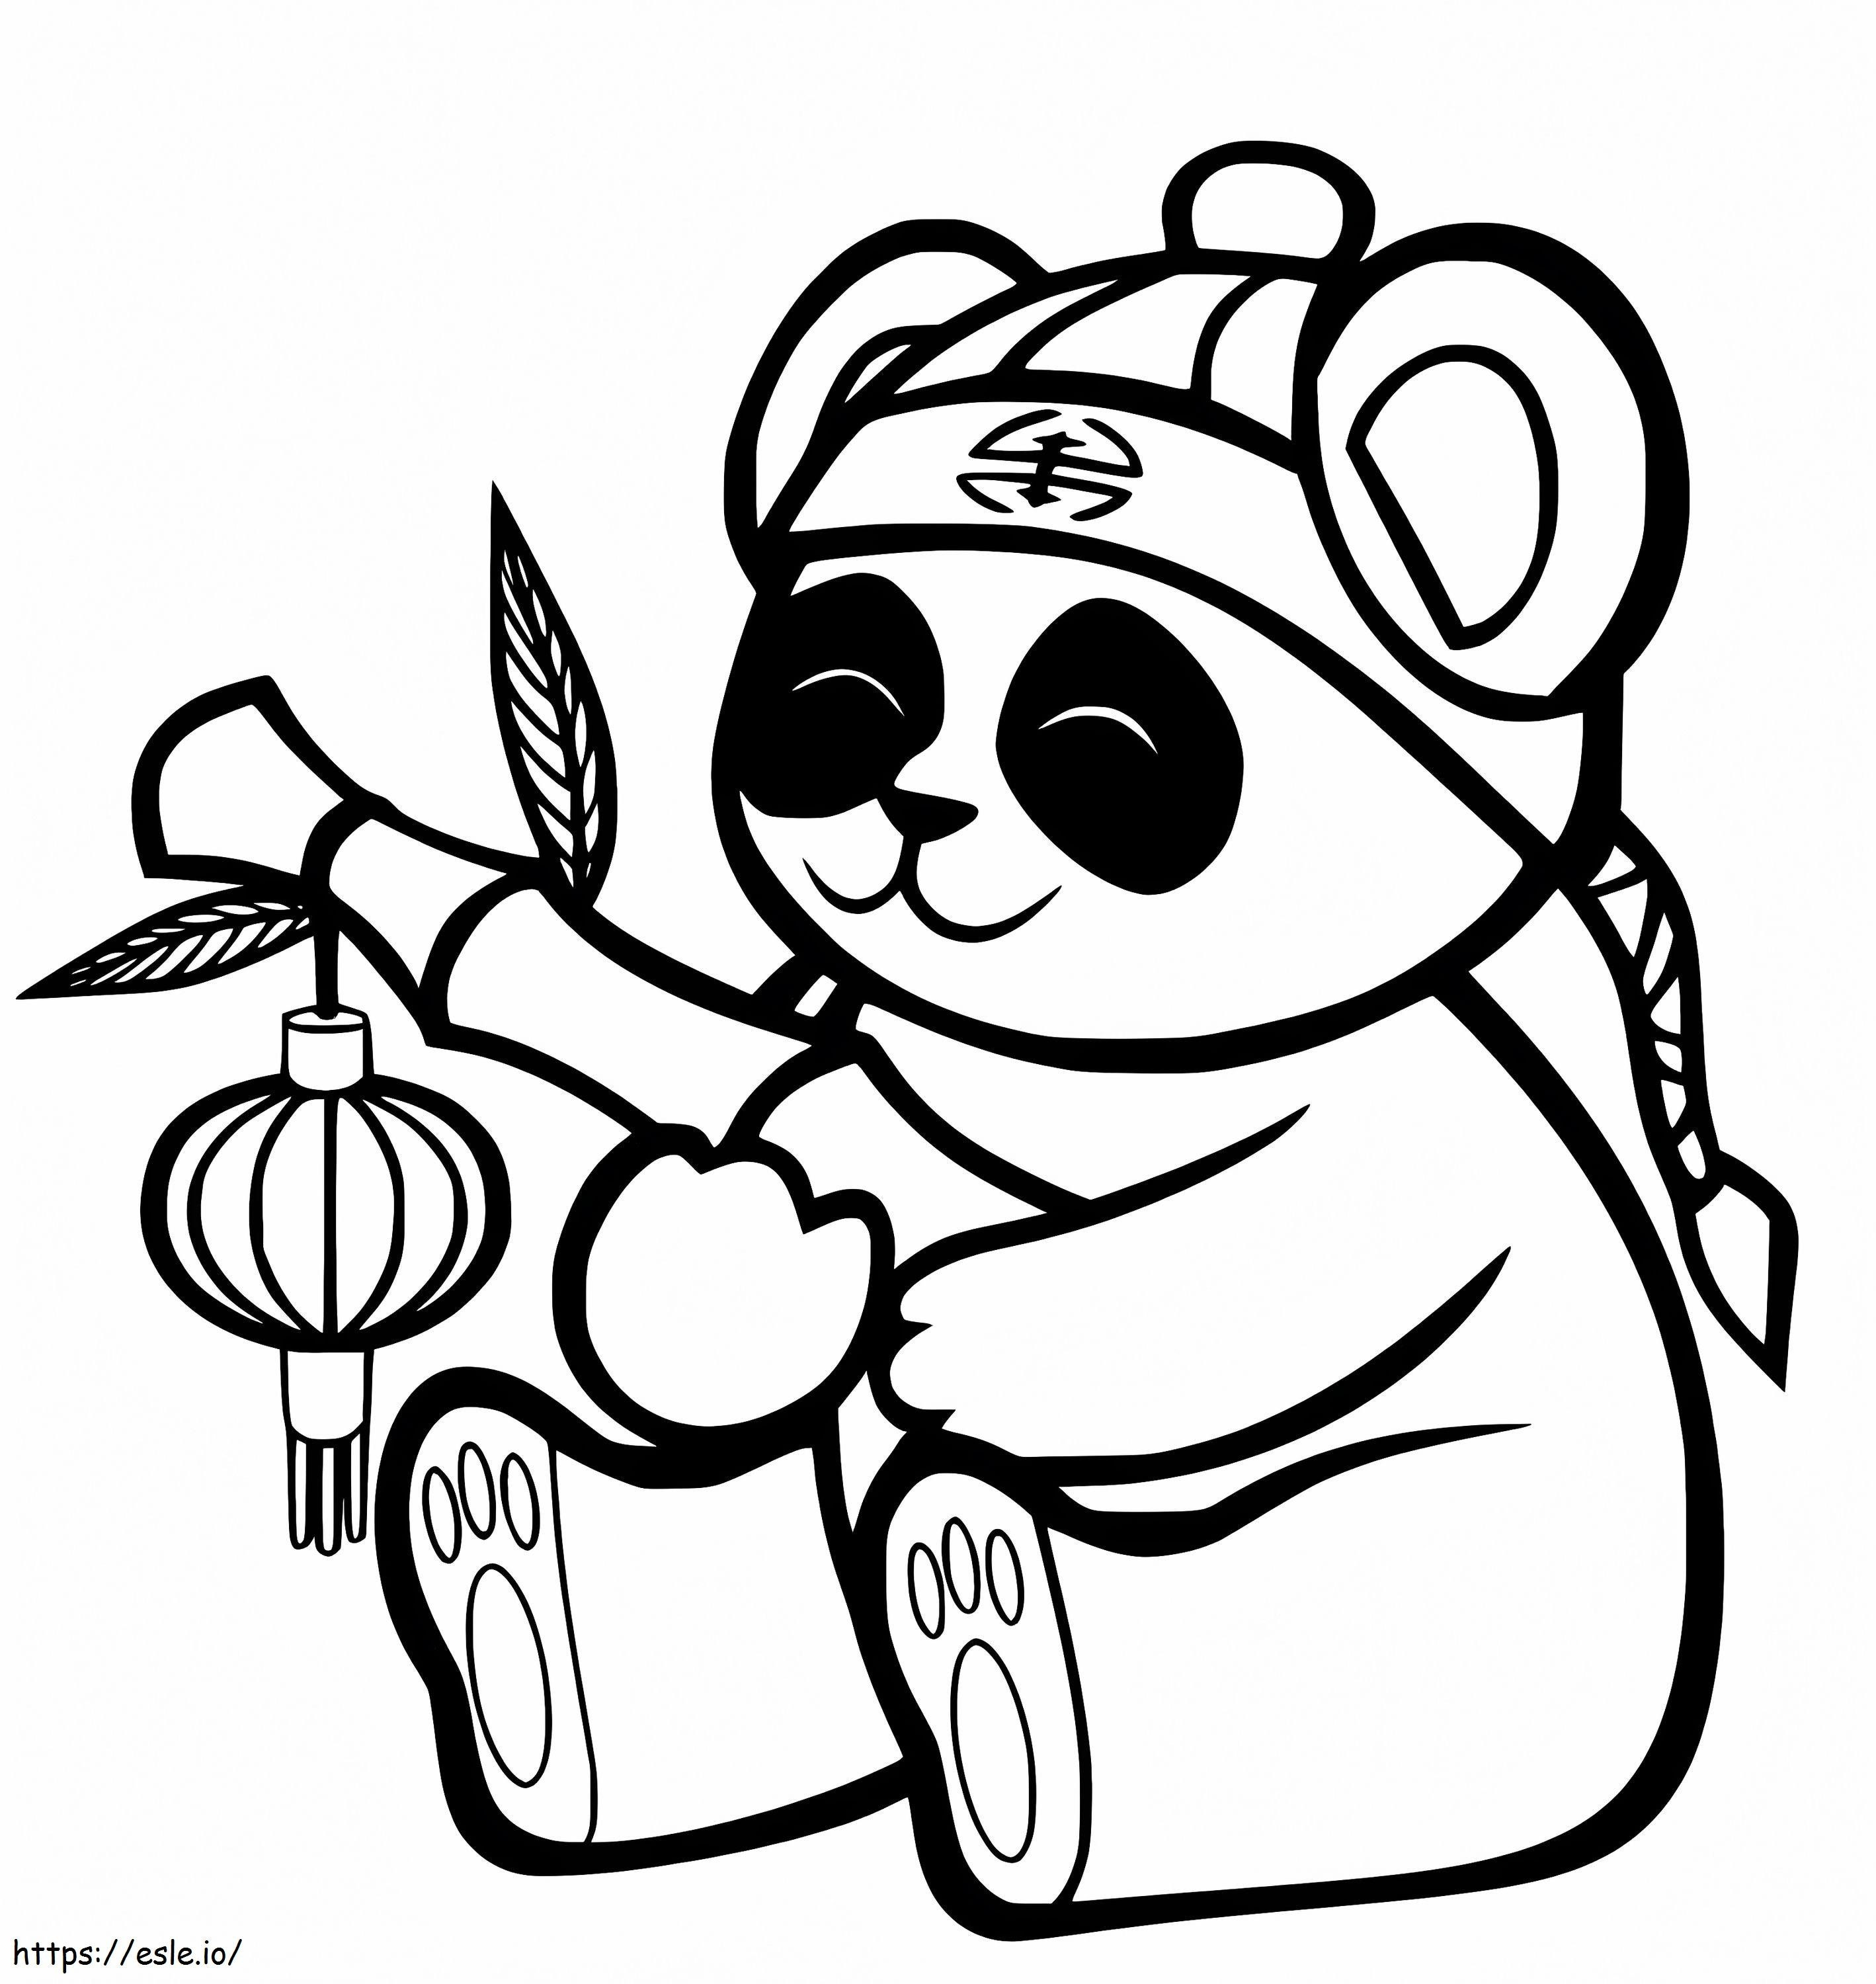 Panda With A Lantern coloring page